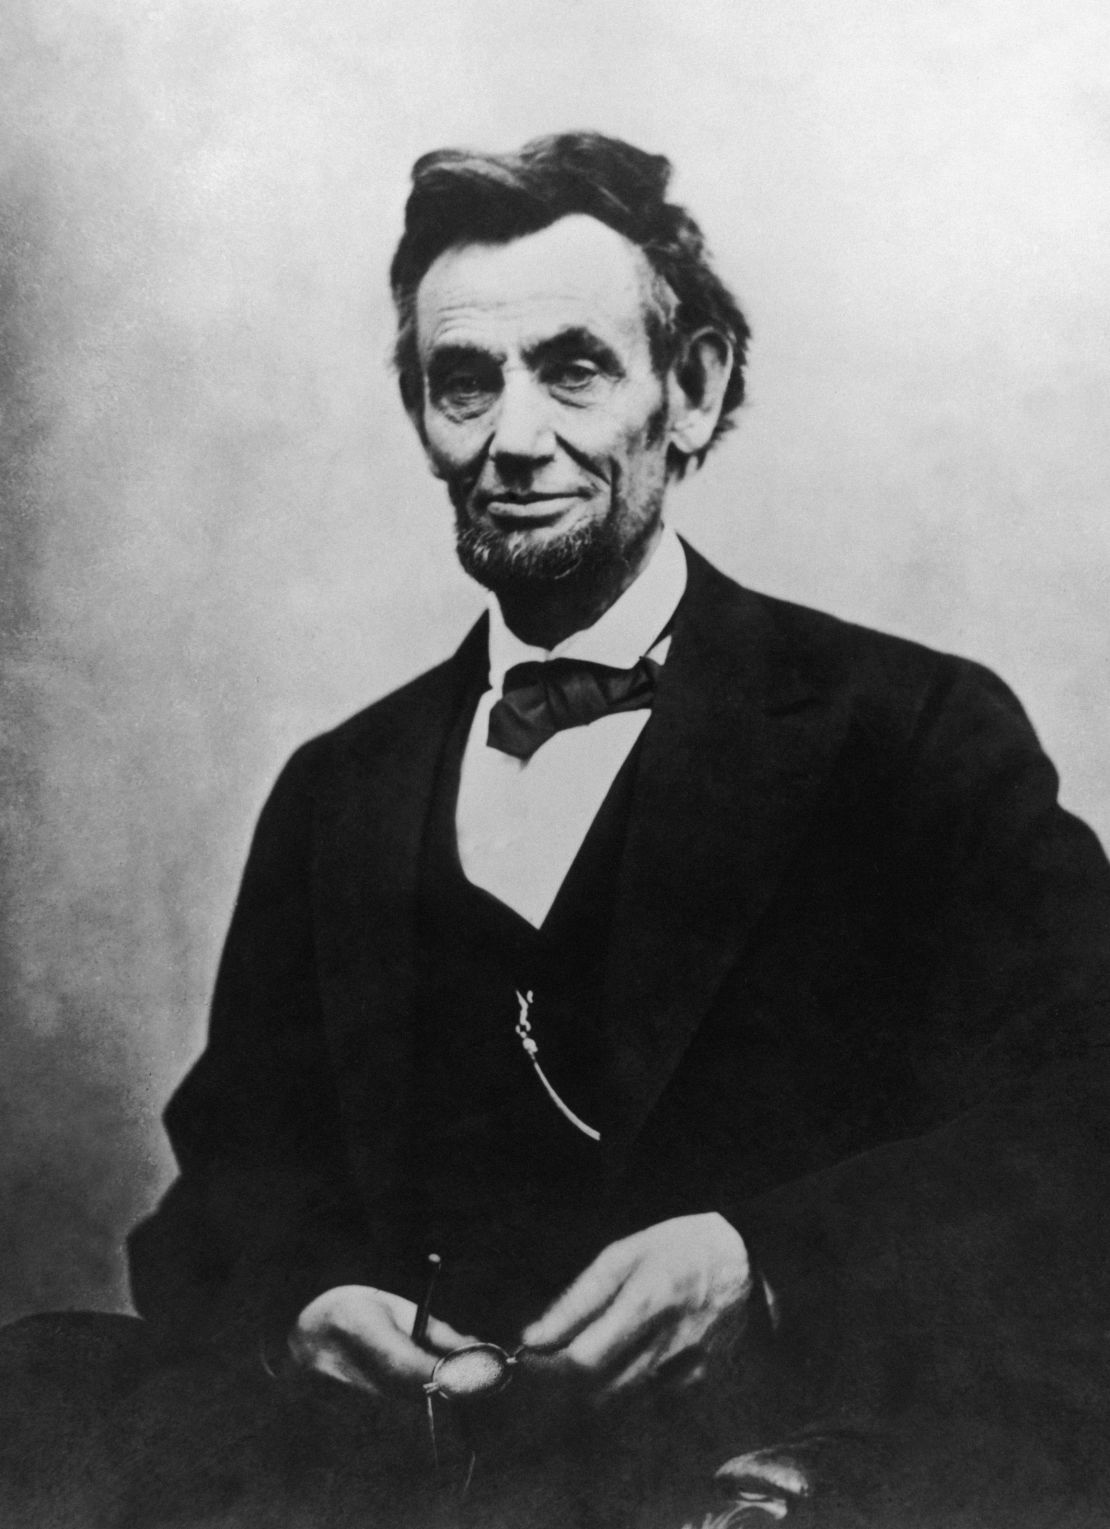 Abraham Lincoln (1809 - 1865), the 16th President of the United States of America.